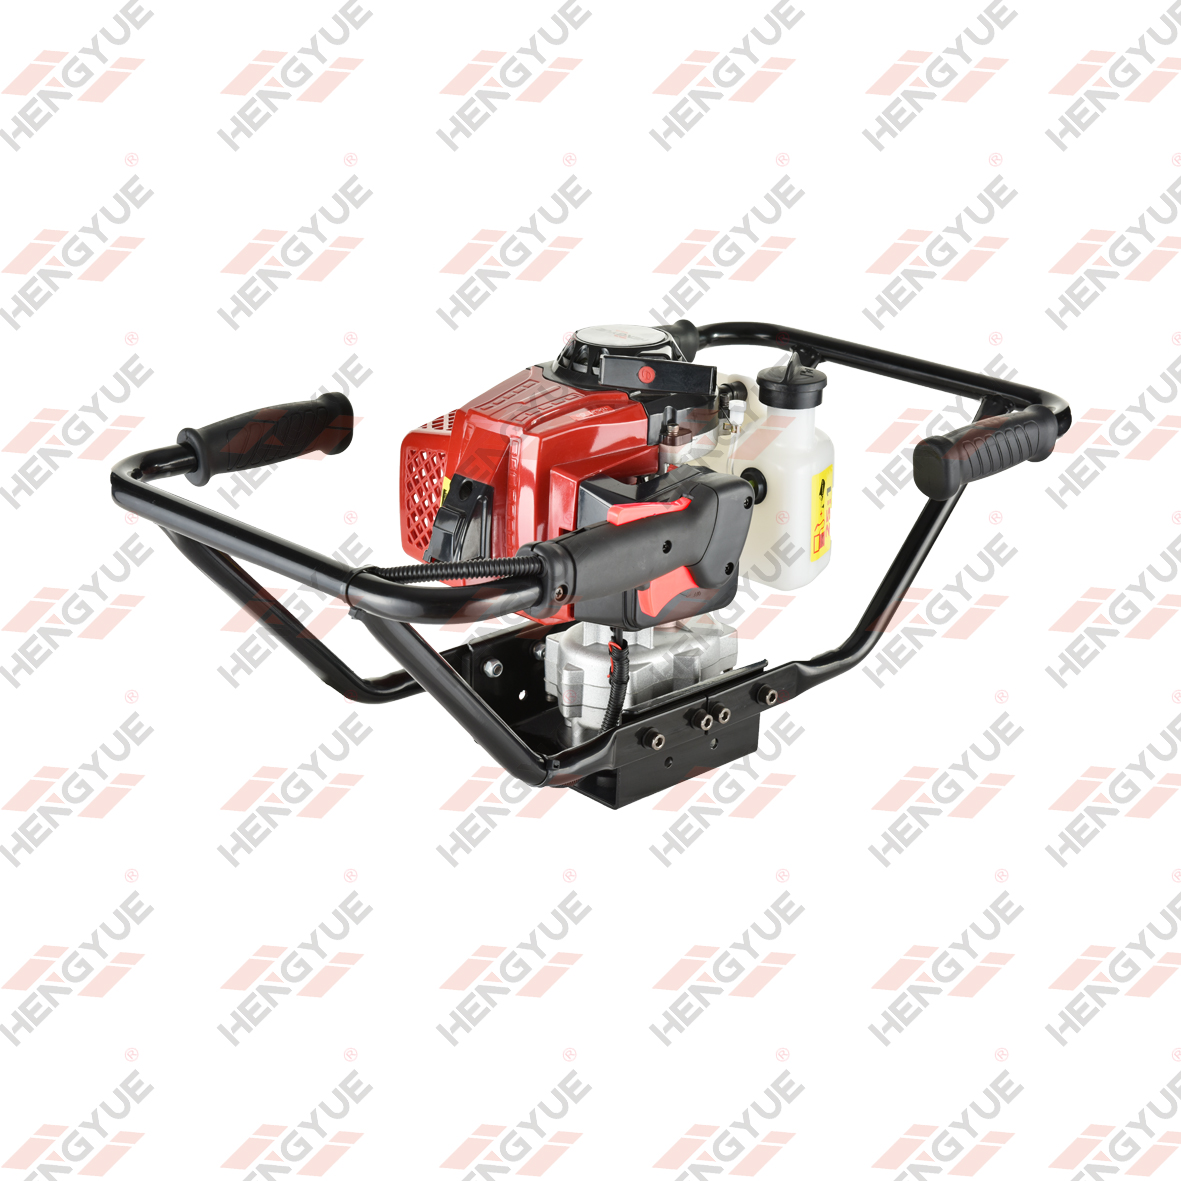 Powered by HONDA GX50 engine popular 2 man operated model earth auger